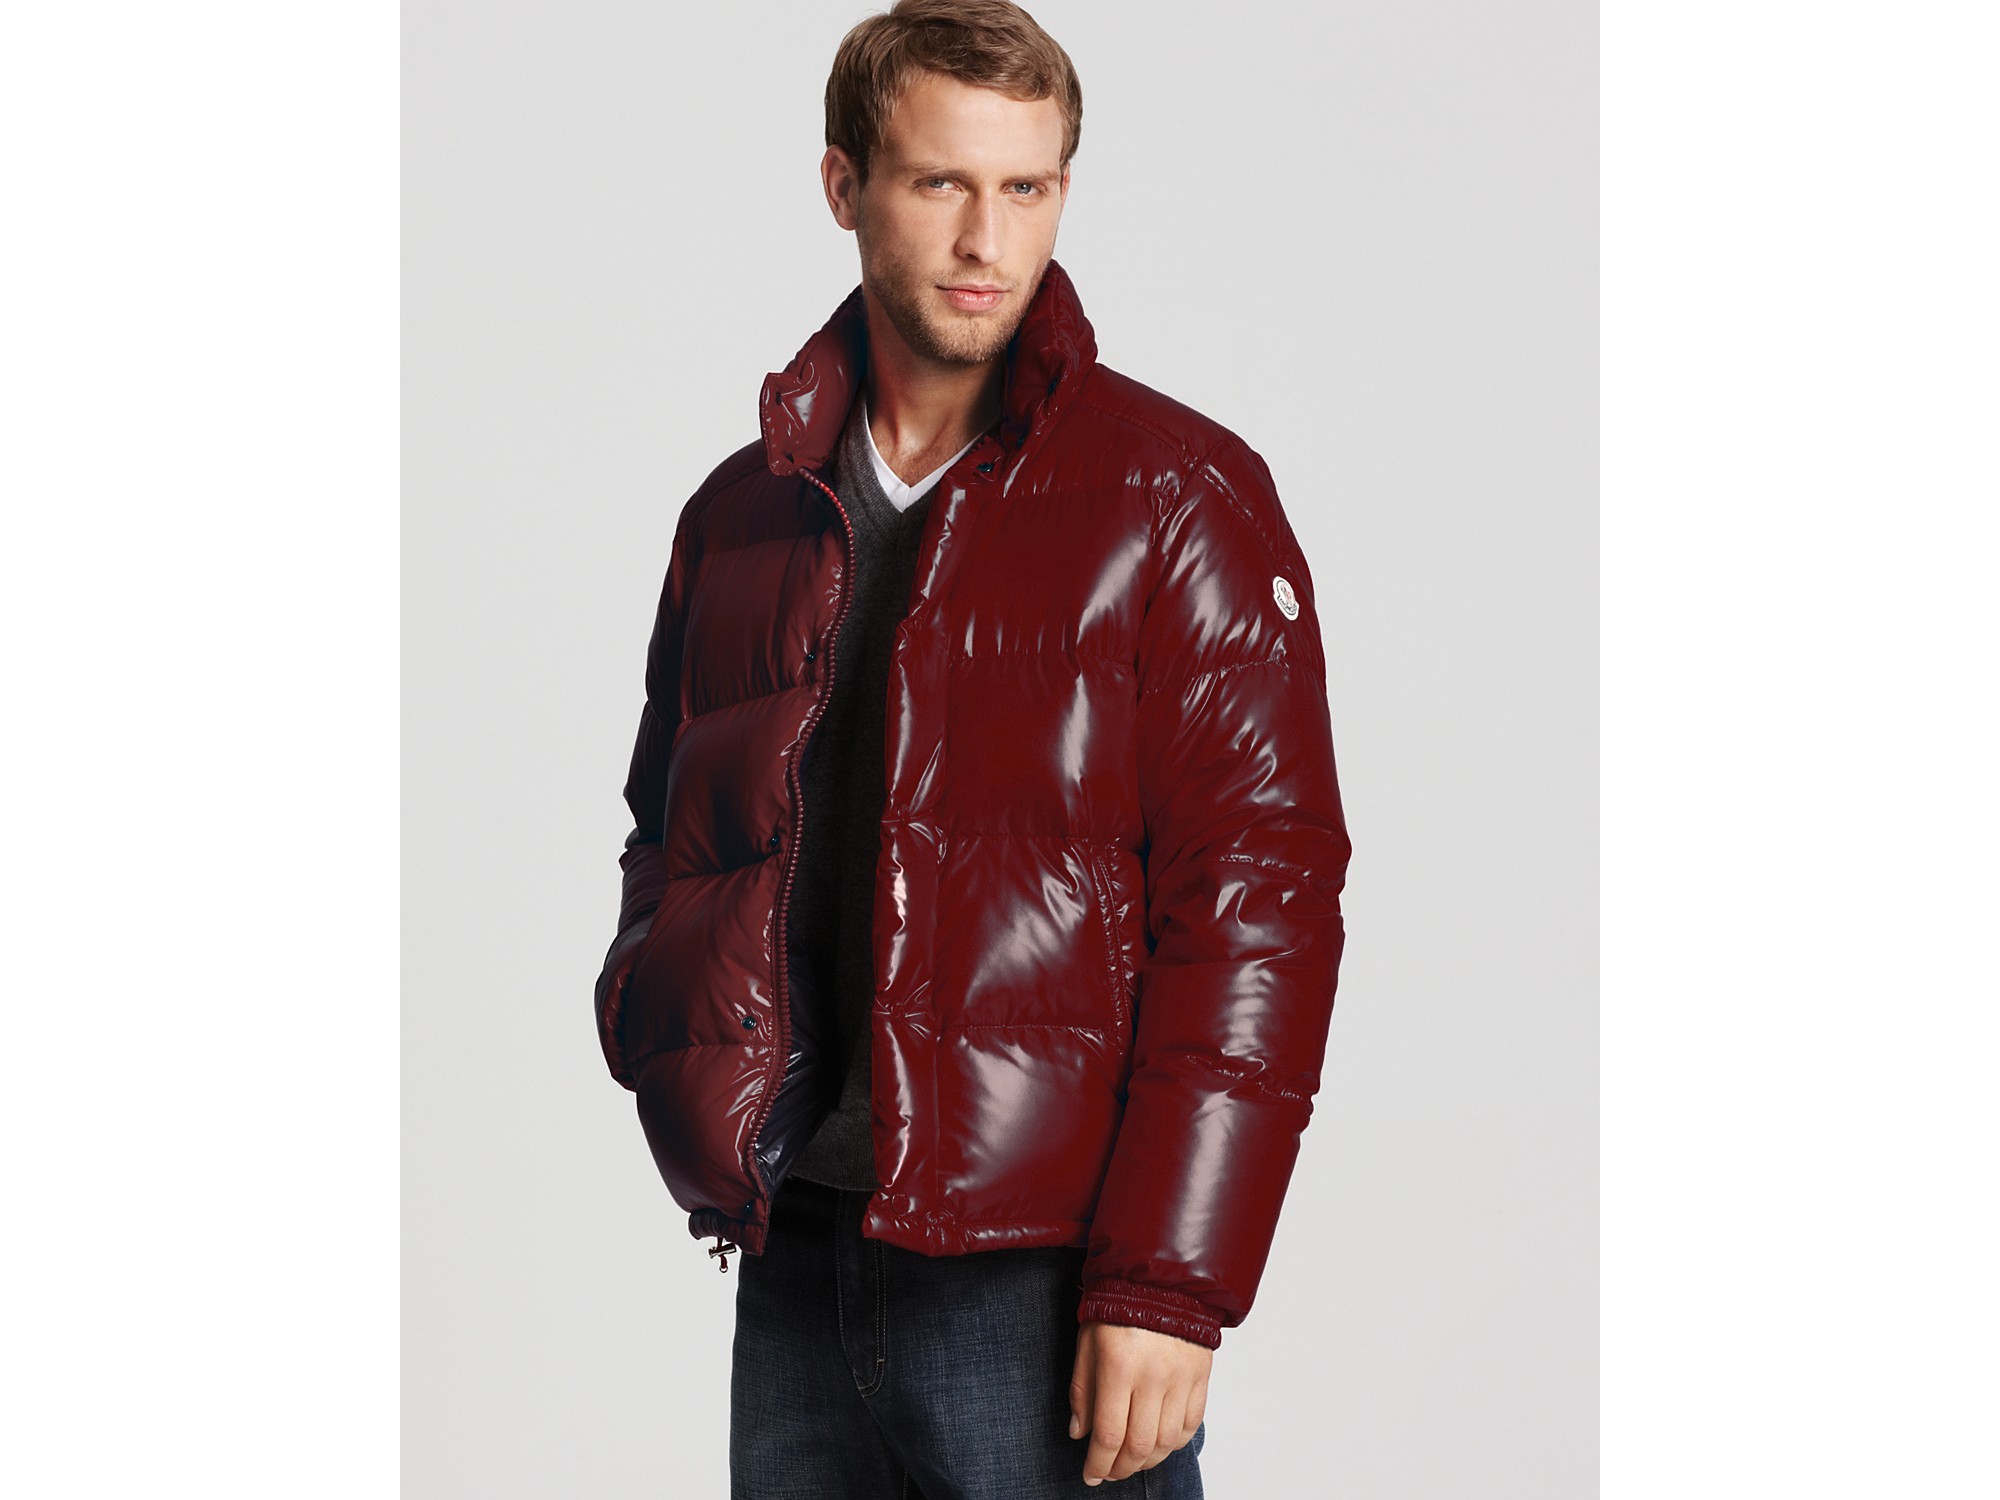 Moncler Ever Bomber Jacket in Plum (Red 